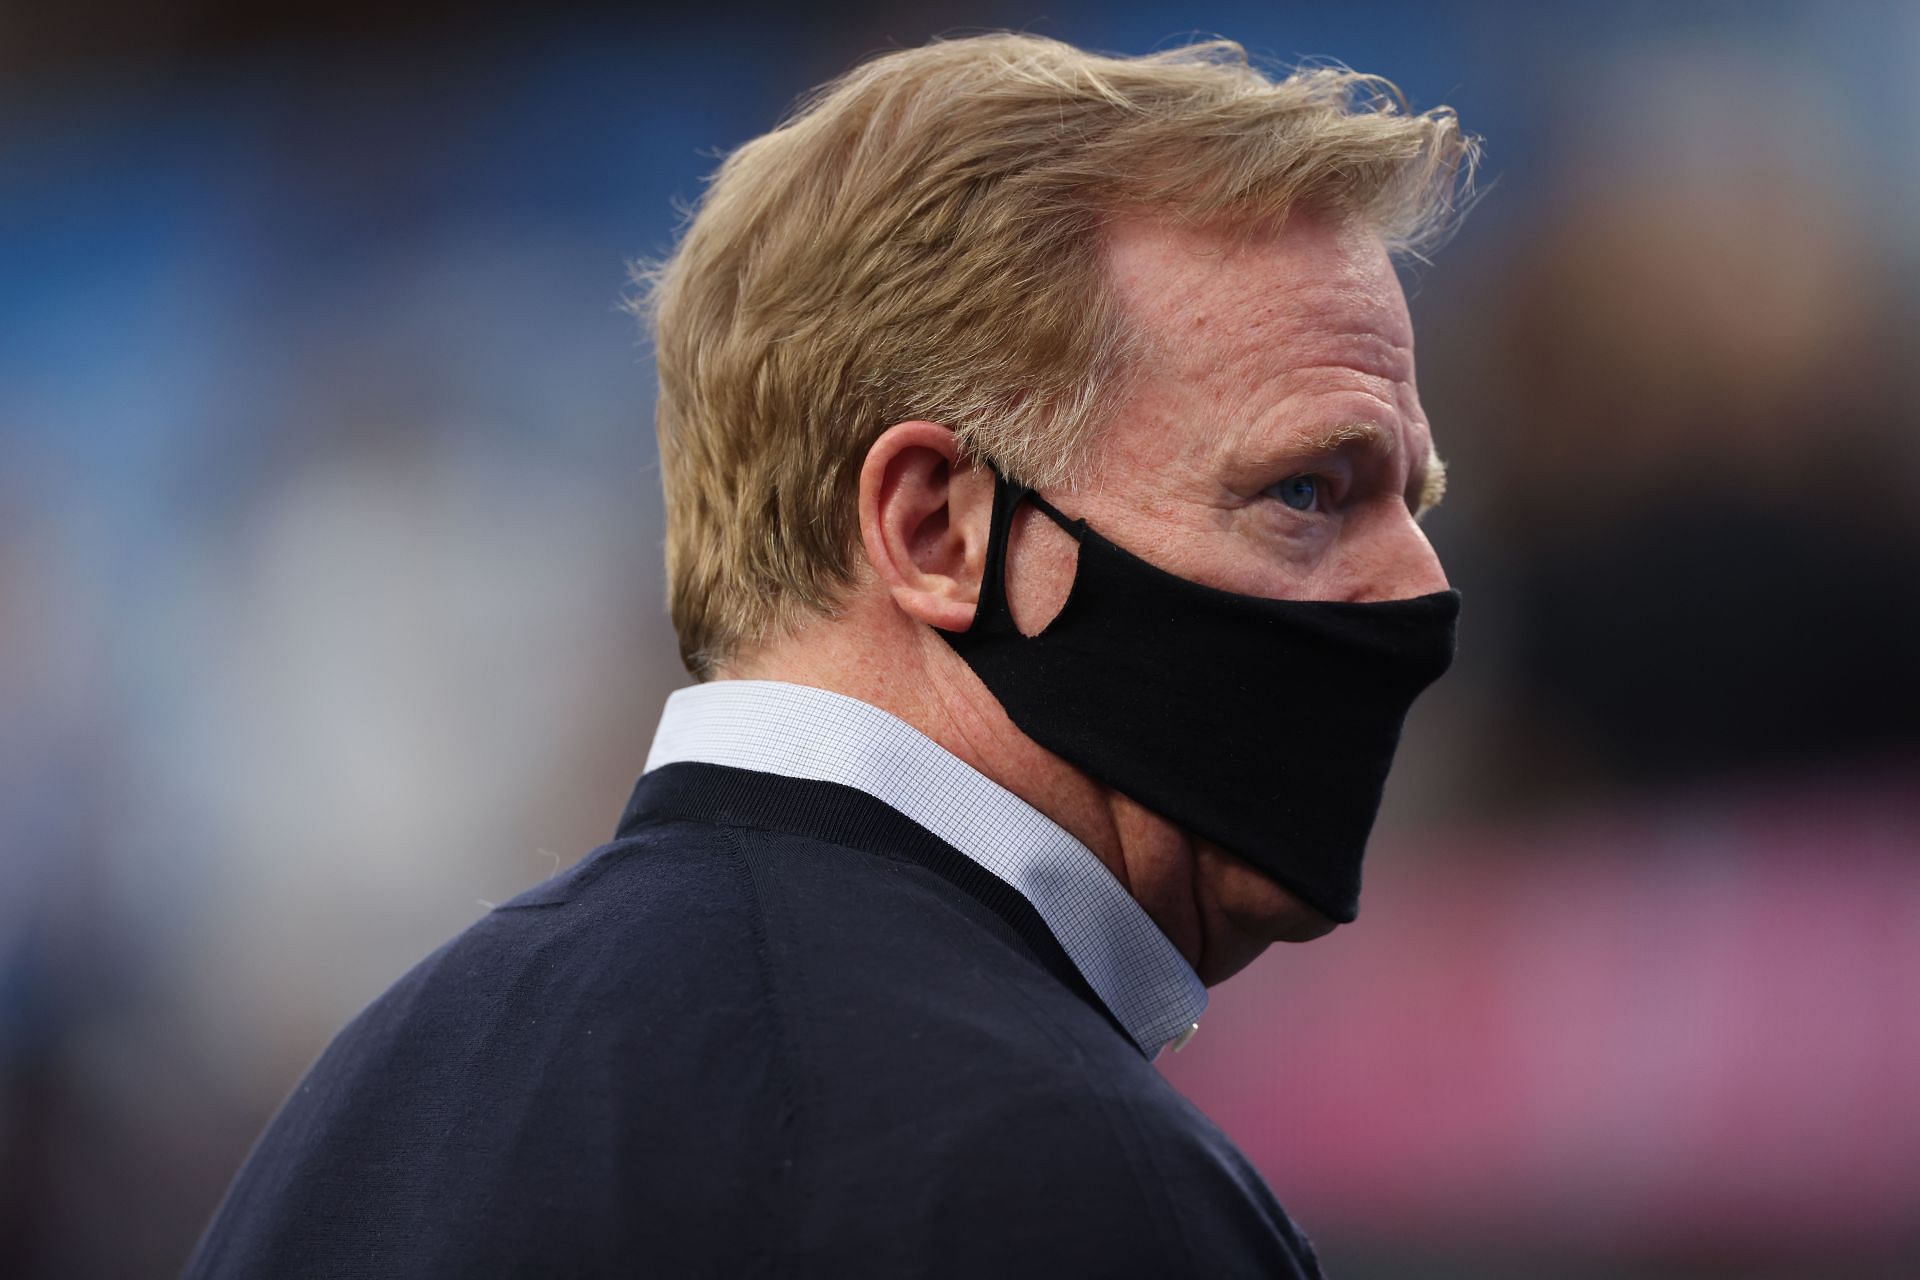 When will Goodell tell the truth?